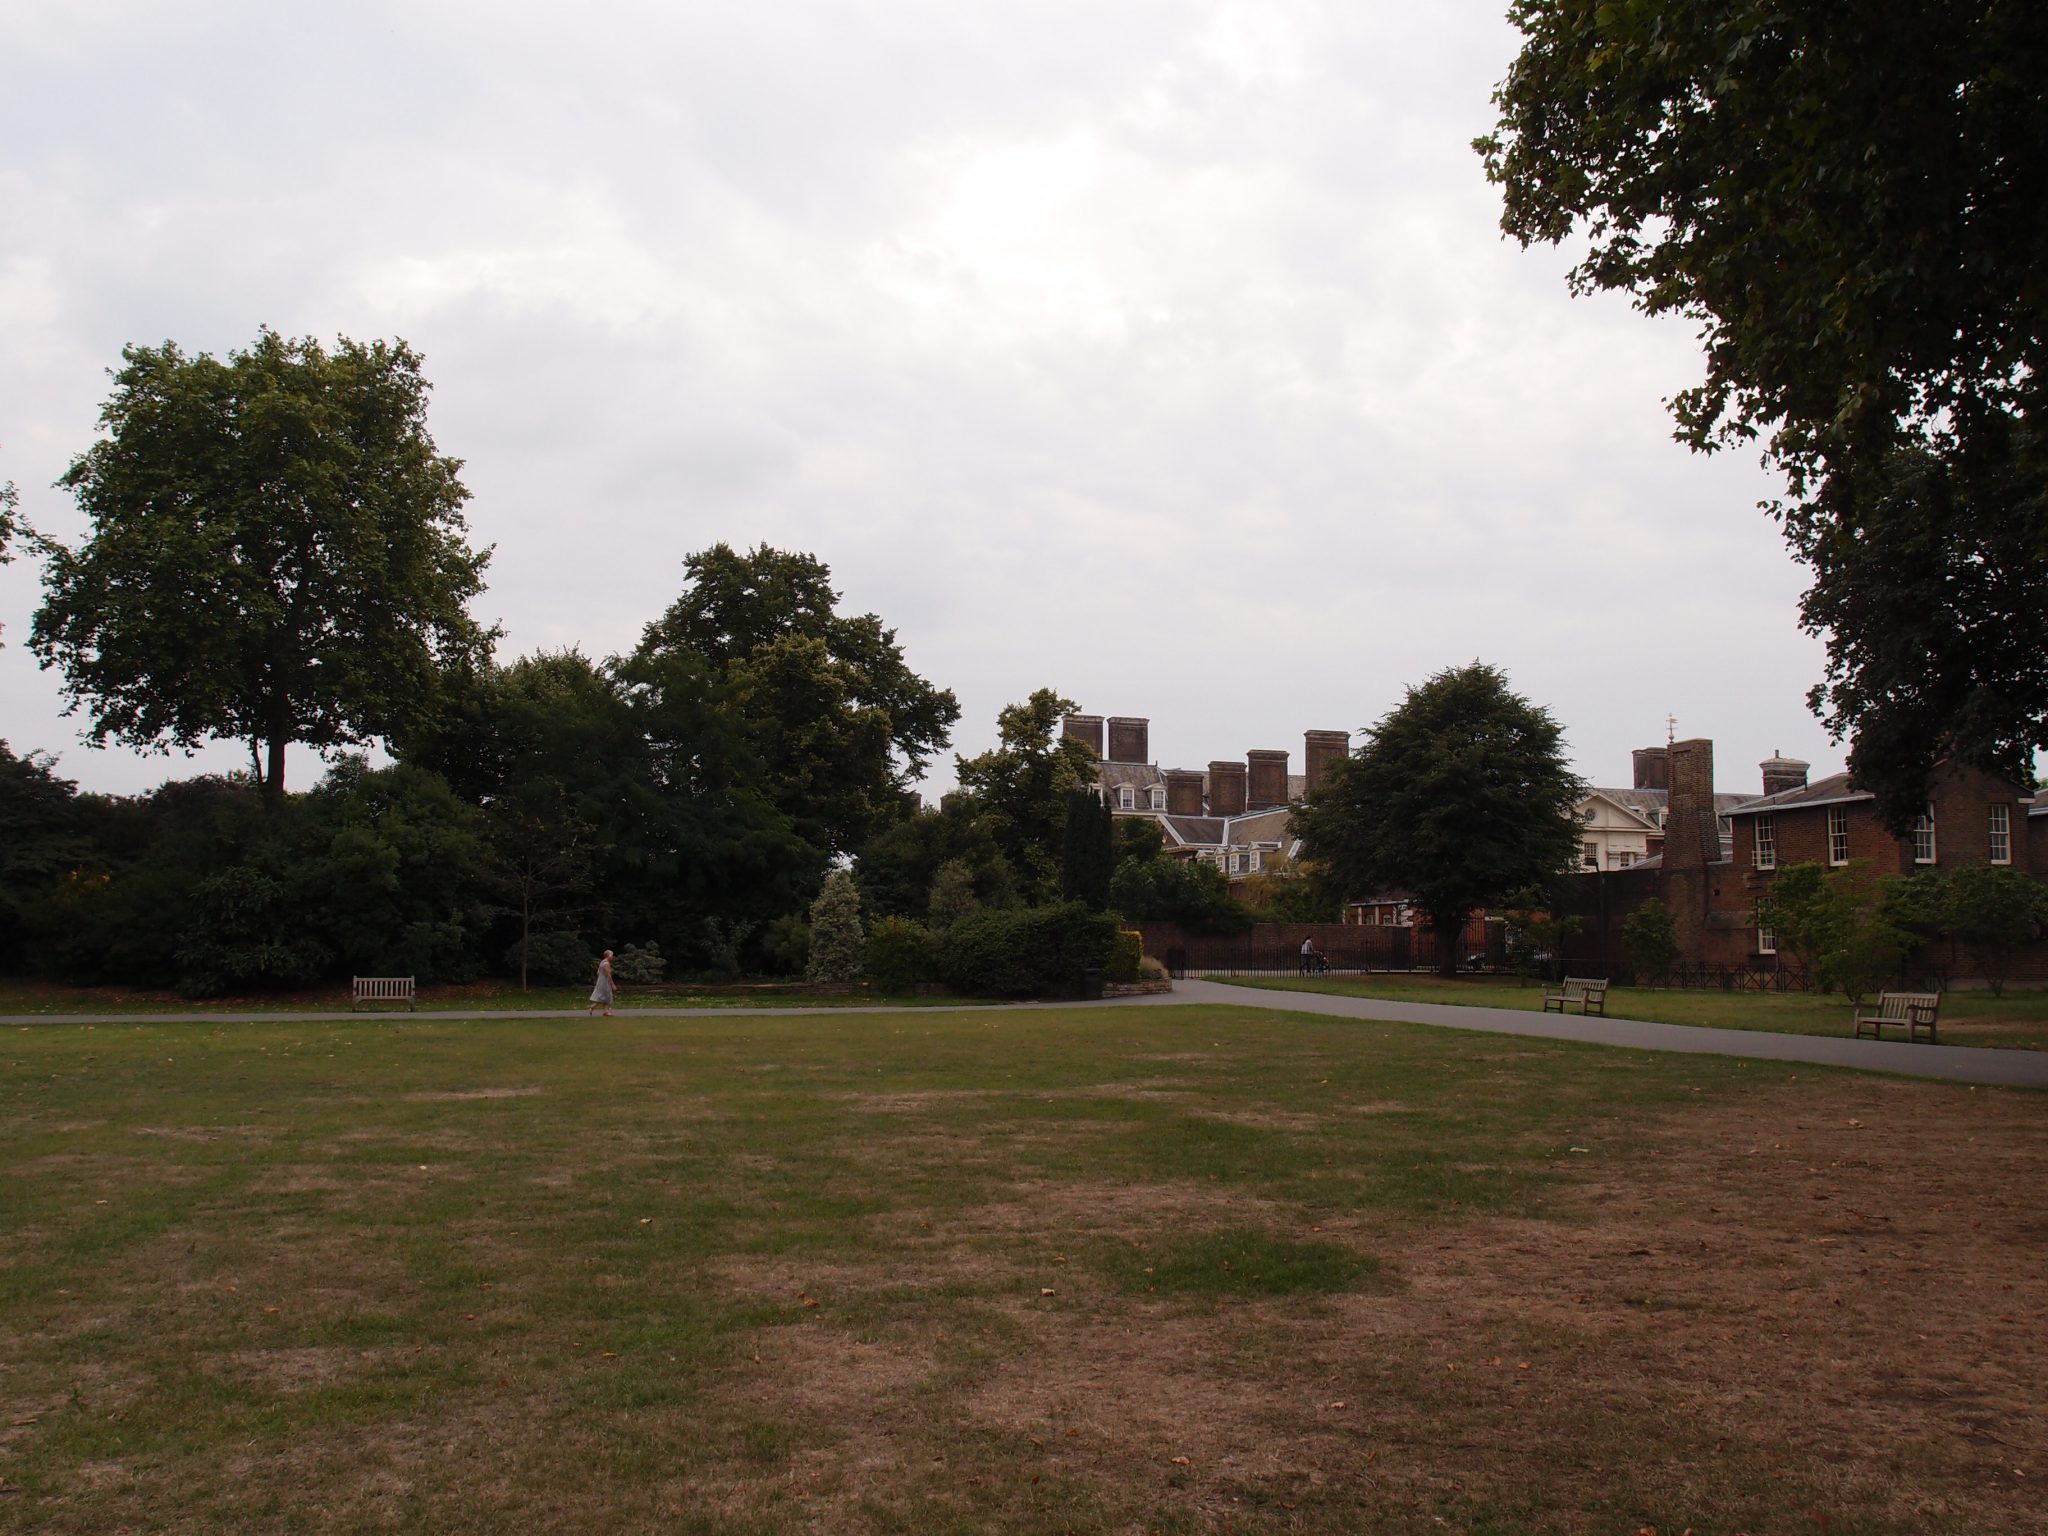 Another Reality Check! Peering back in time: during my August 23, 2013 visit to the grounds at the Royal Hospital. This is the exact site upon which the 2014 M&G Show Garden would be built, 8 months later.